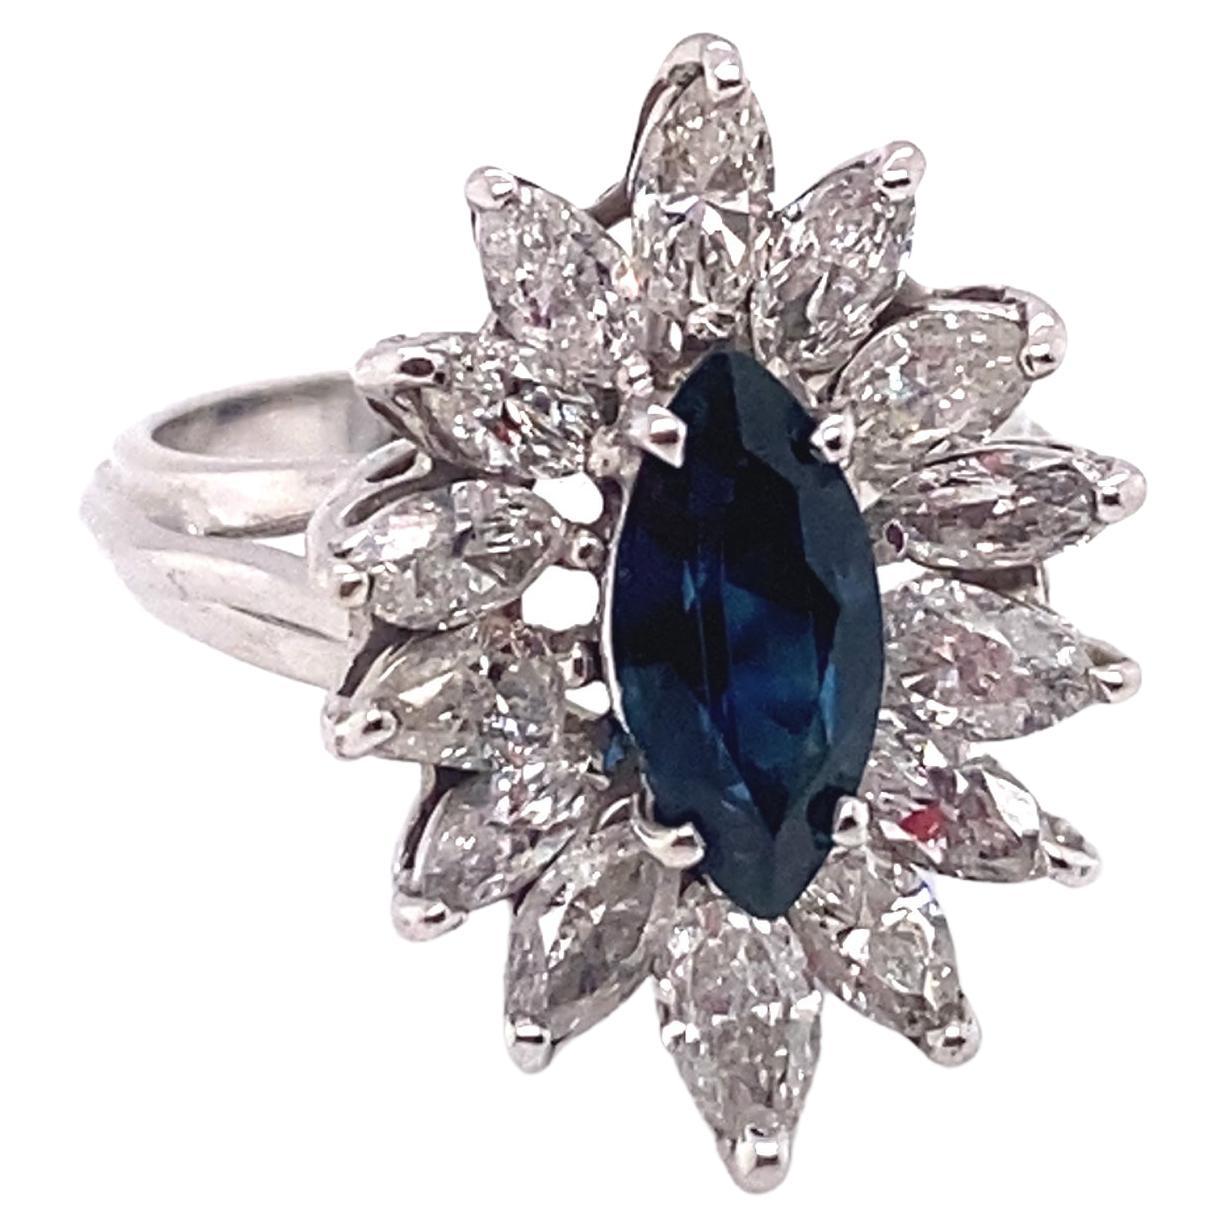 1950s 0.80 Carat Marquise Sapphire and 0.50 Carat Diamond Ring in 18K White Gold